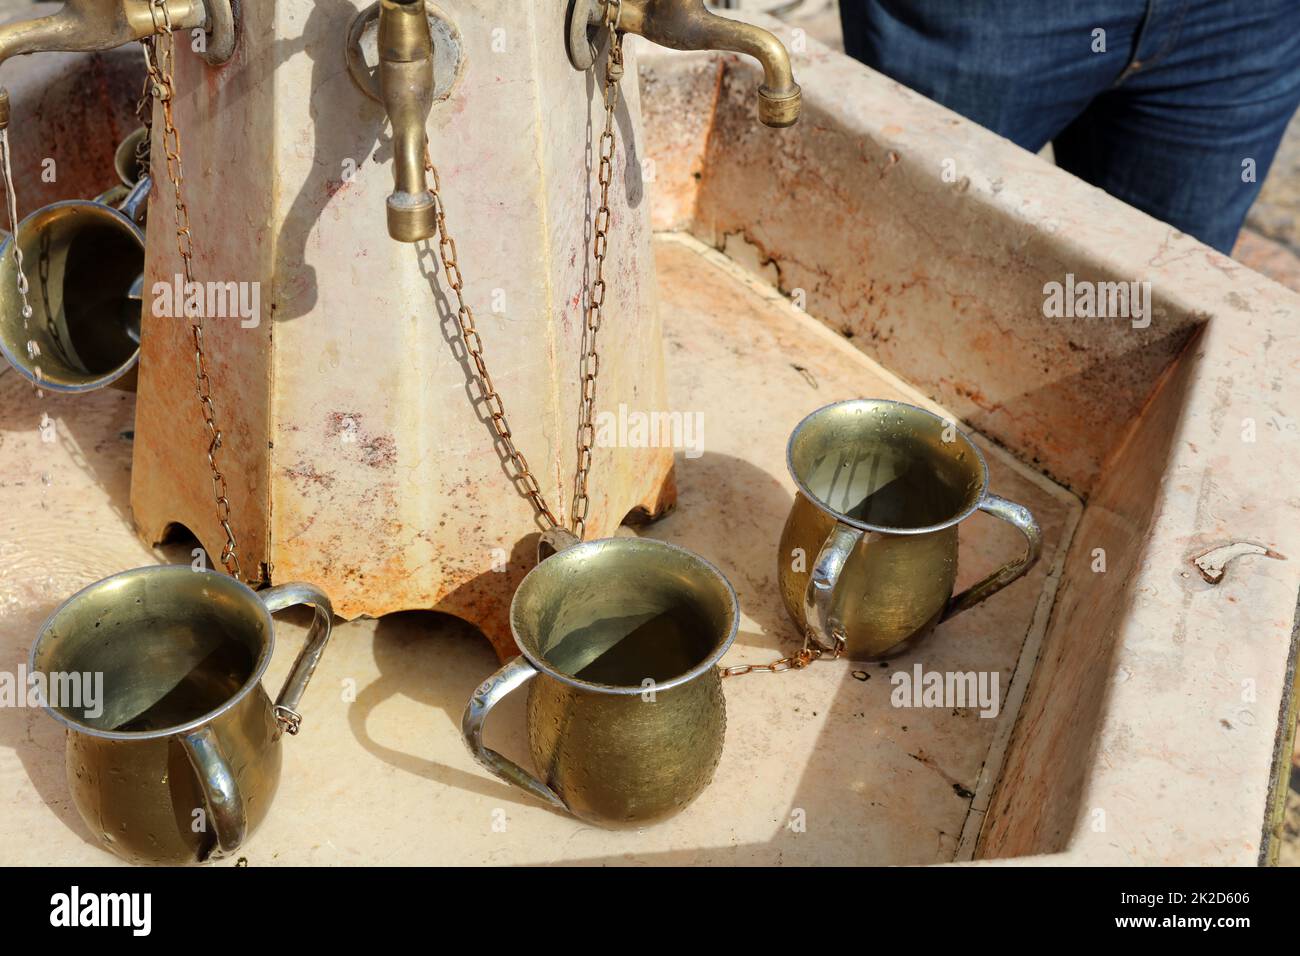 Copper Pots for ritual Ablution in front of the Wailing Wall in Jerusalem. Israel Stock Photo